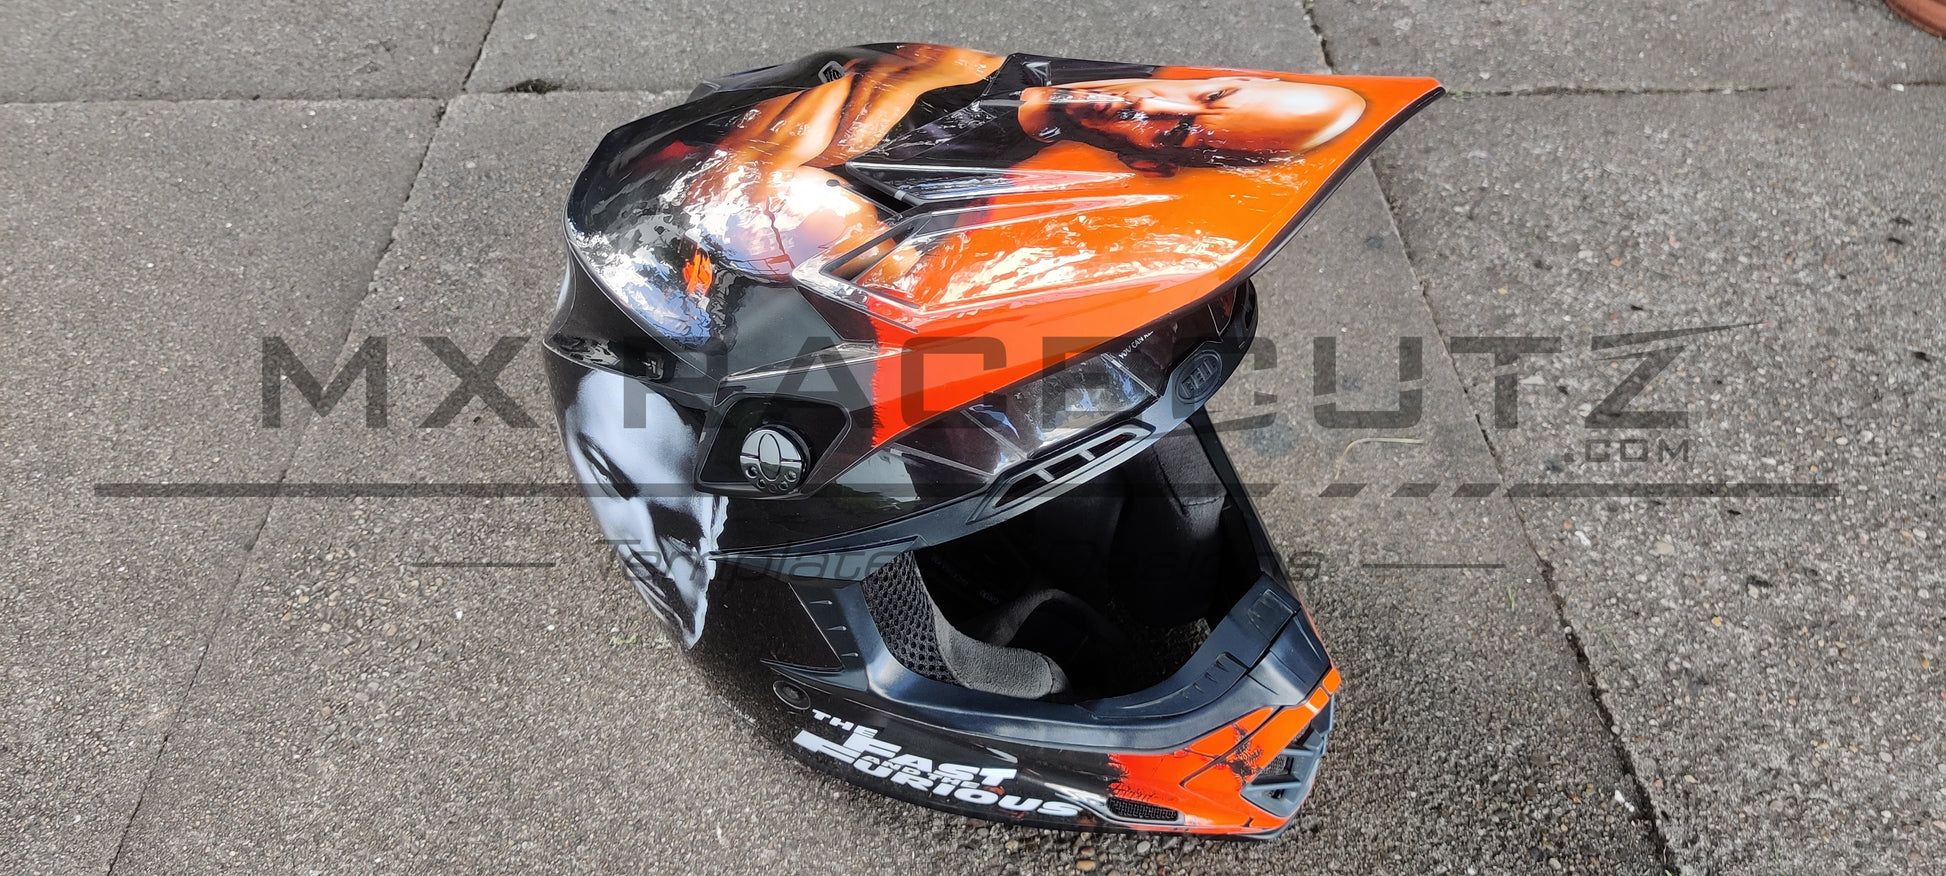 Kit déco perso casque BELL Moto 9